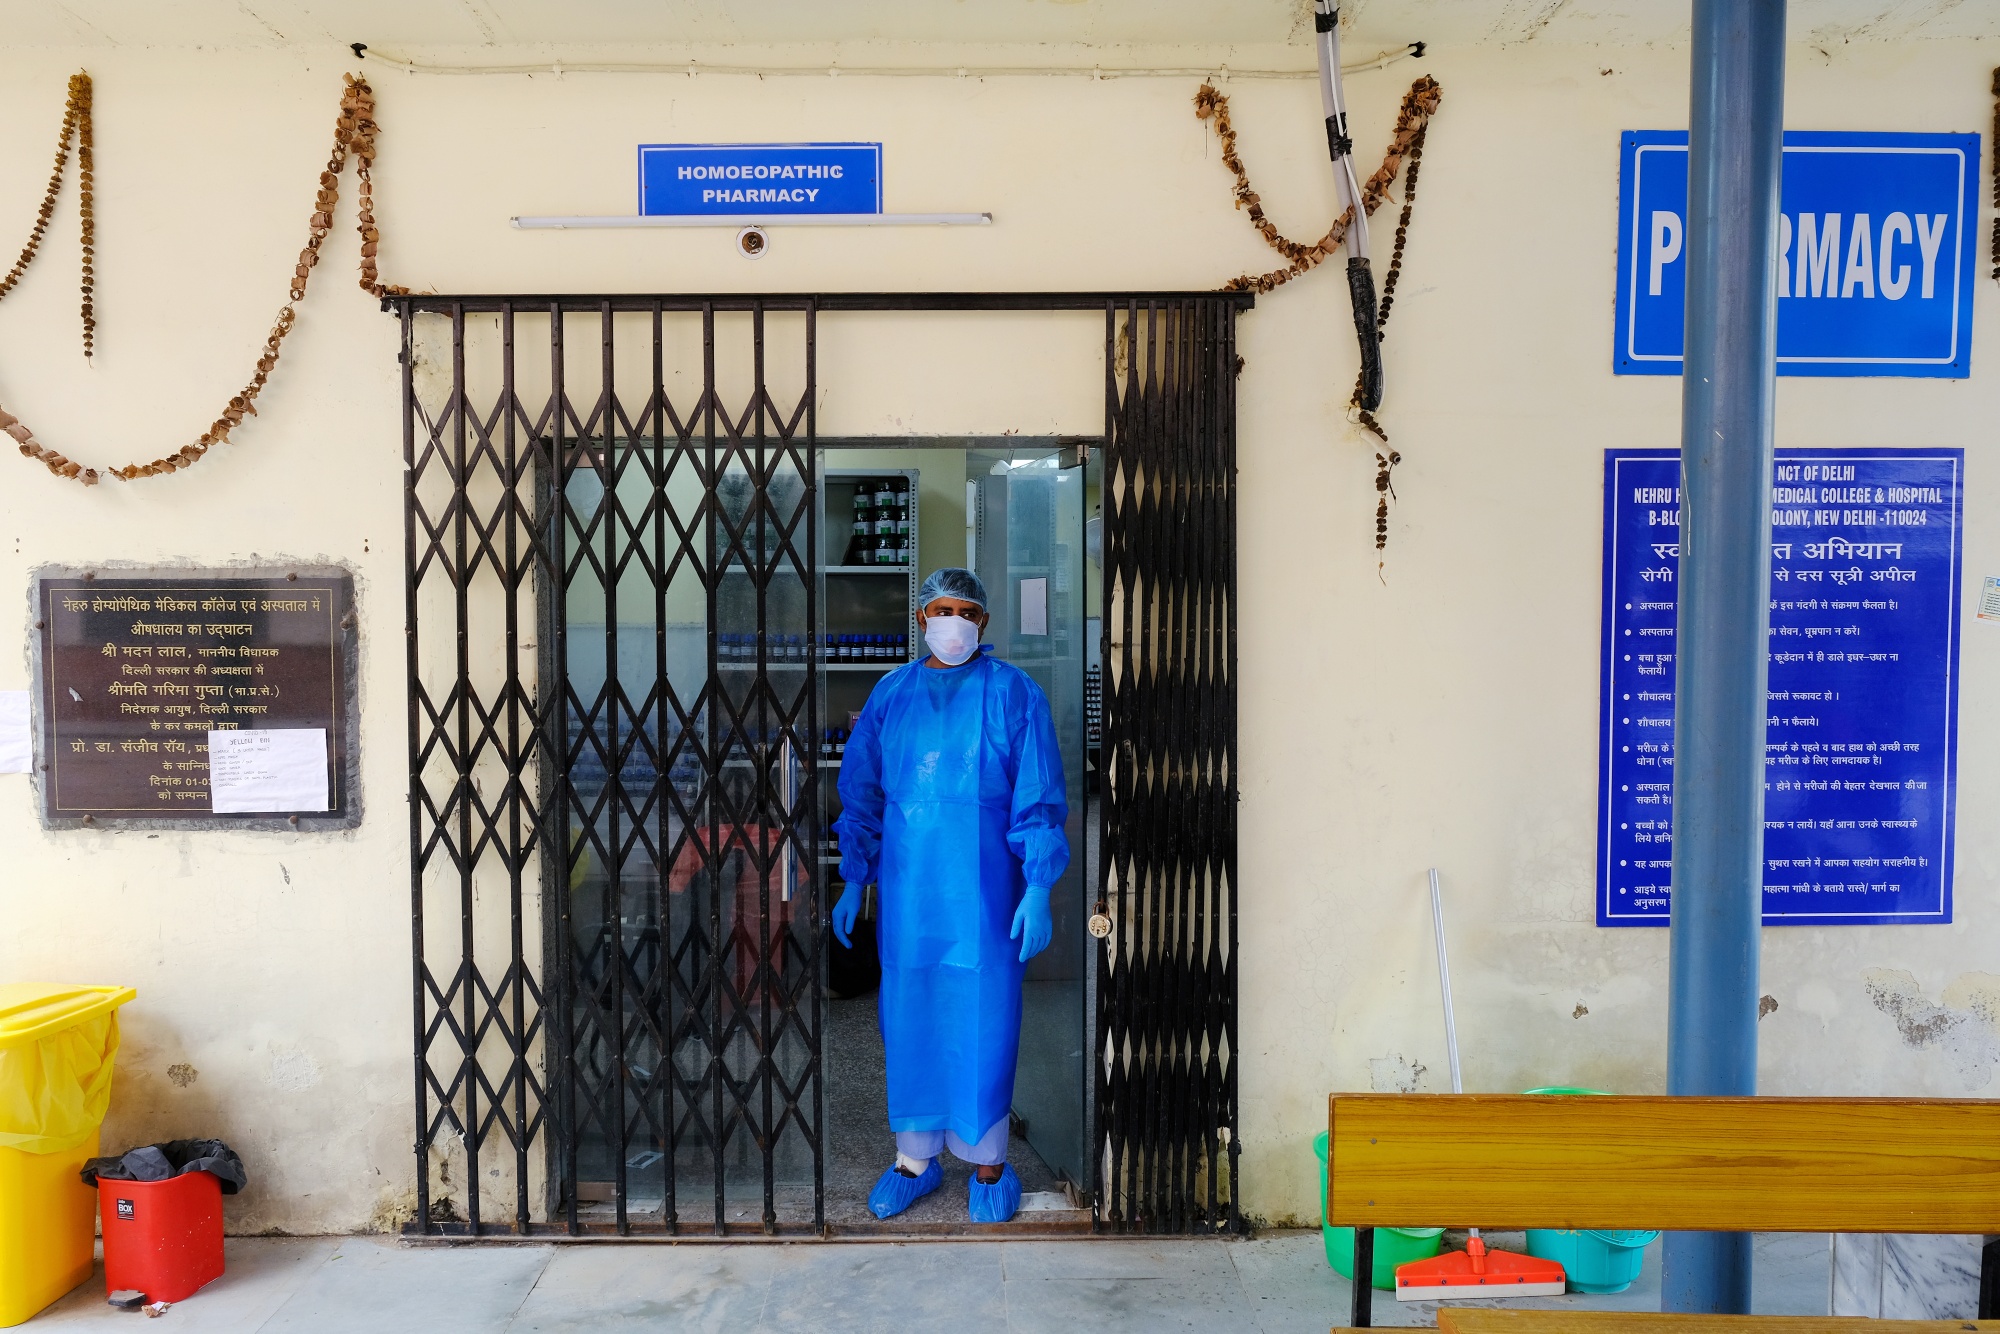 A health worker wearing personal protective equipment stands in a doorway at a rapid-antigen methodology Covid-19 testing center&nbsp;in New Delhi.